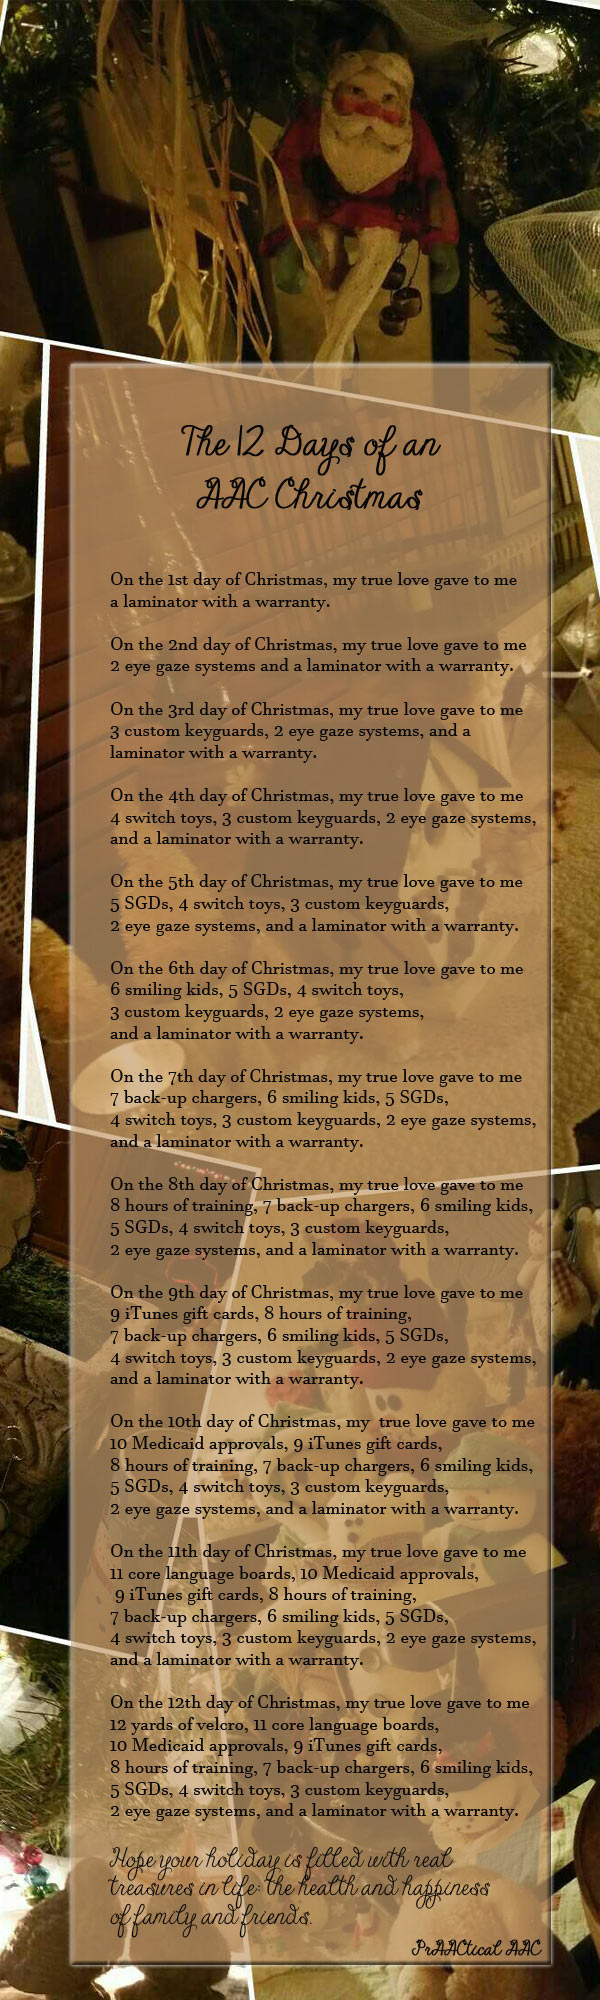 The 12 Days of an AAC Christmas